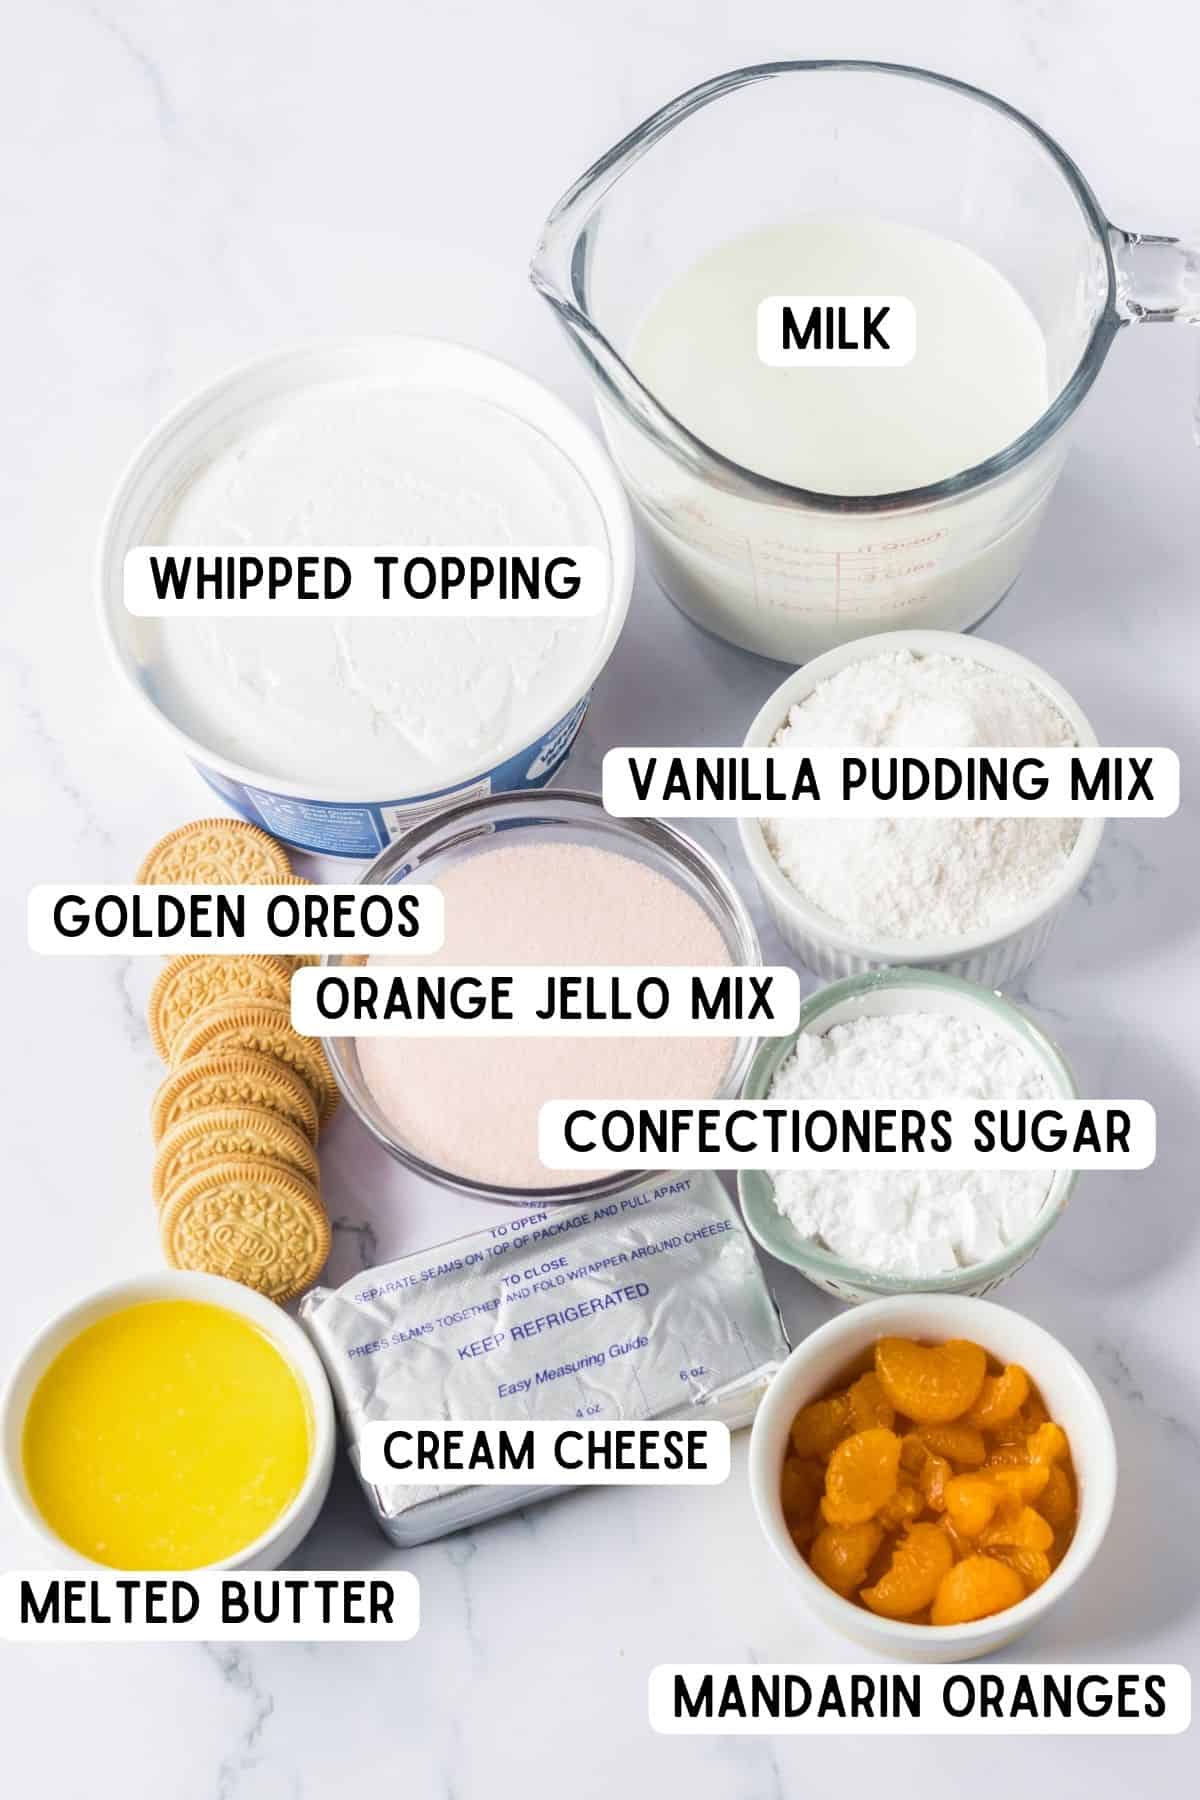 Whipped topping, milk, vanilla pudding mix, orange jello mix, confectioners sugar, golden oreos, cream cheese, mandarin orange pieces, melted butter, whipped topping, cream cheese.